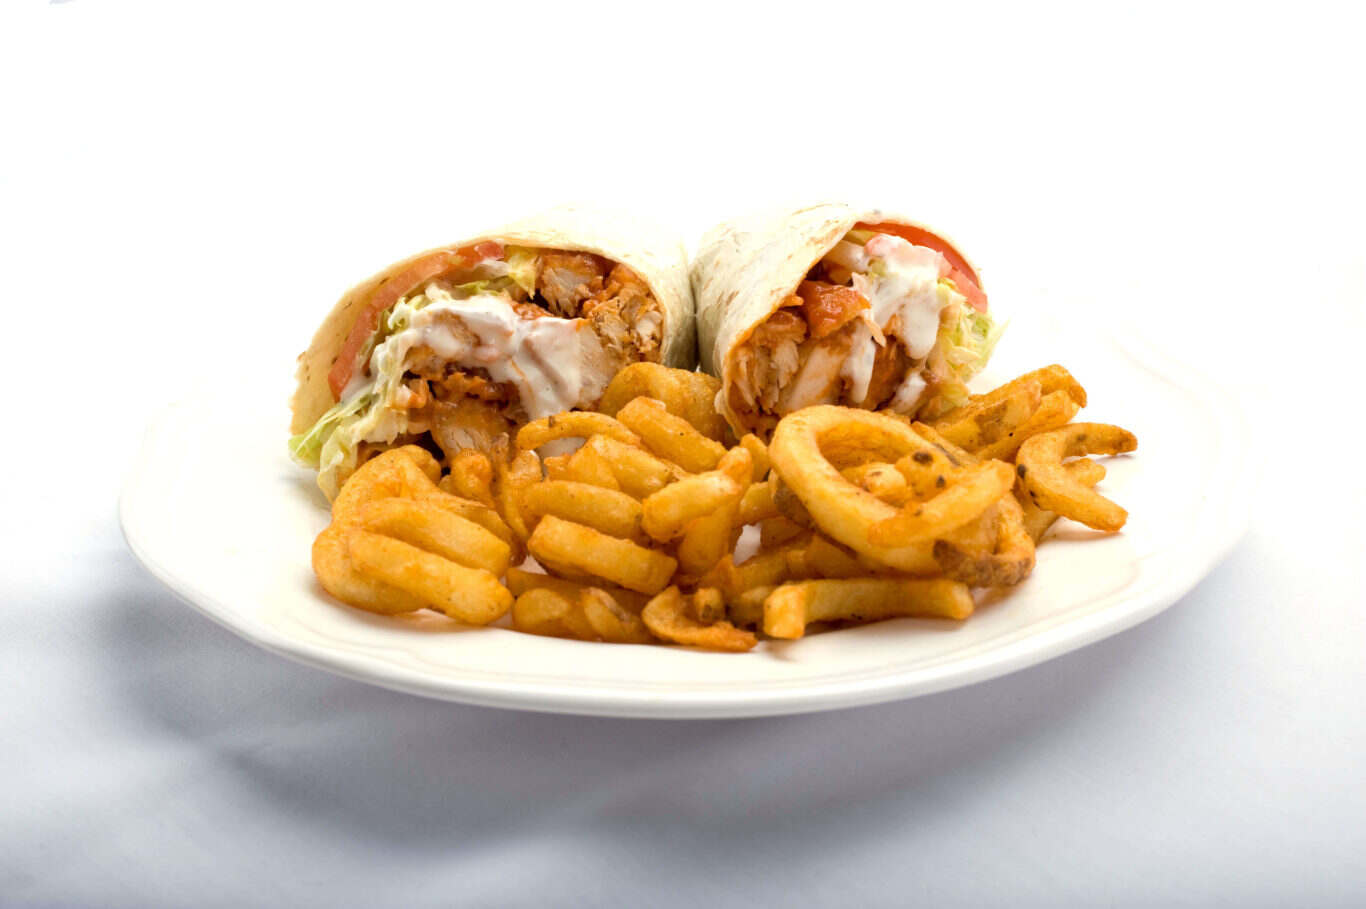 A mouthwatering buffalo chicken wrap accompanied by golden fries on a plate from Genova's To Go.